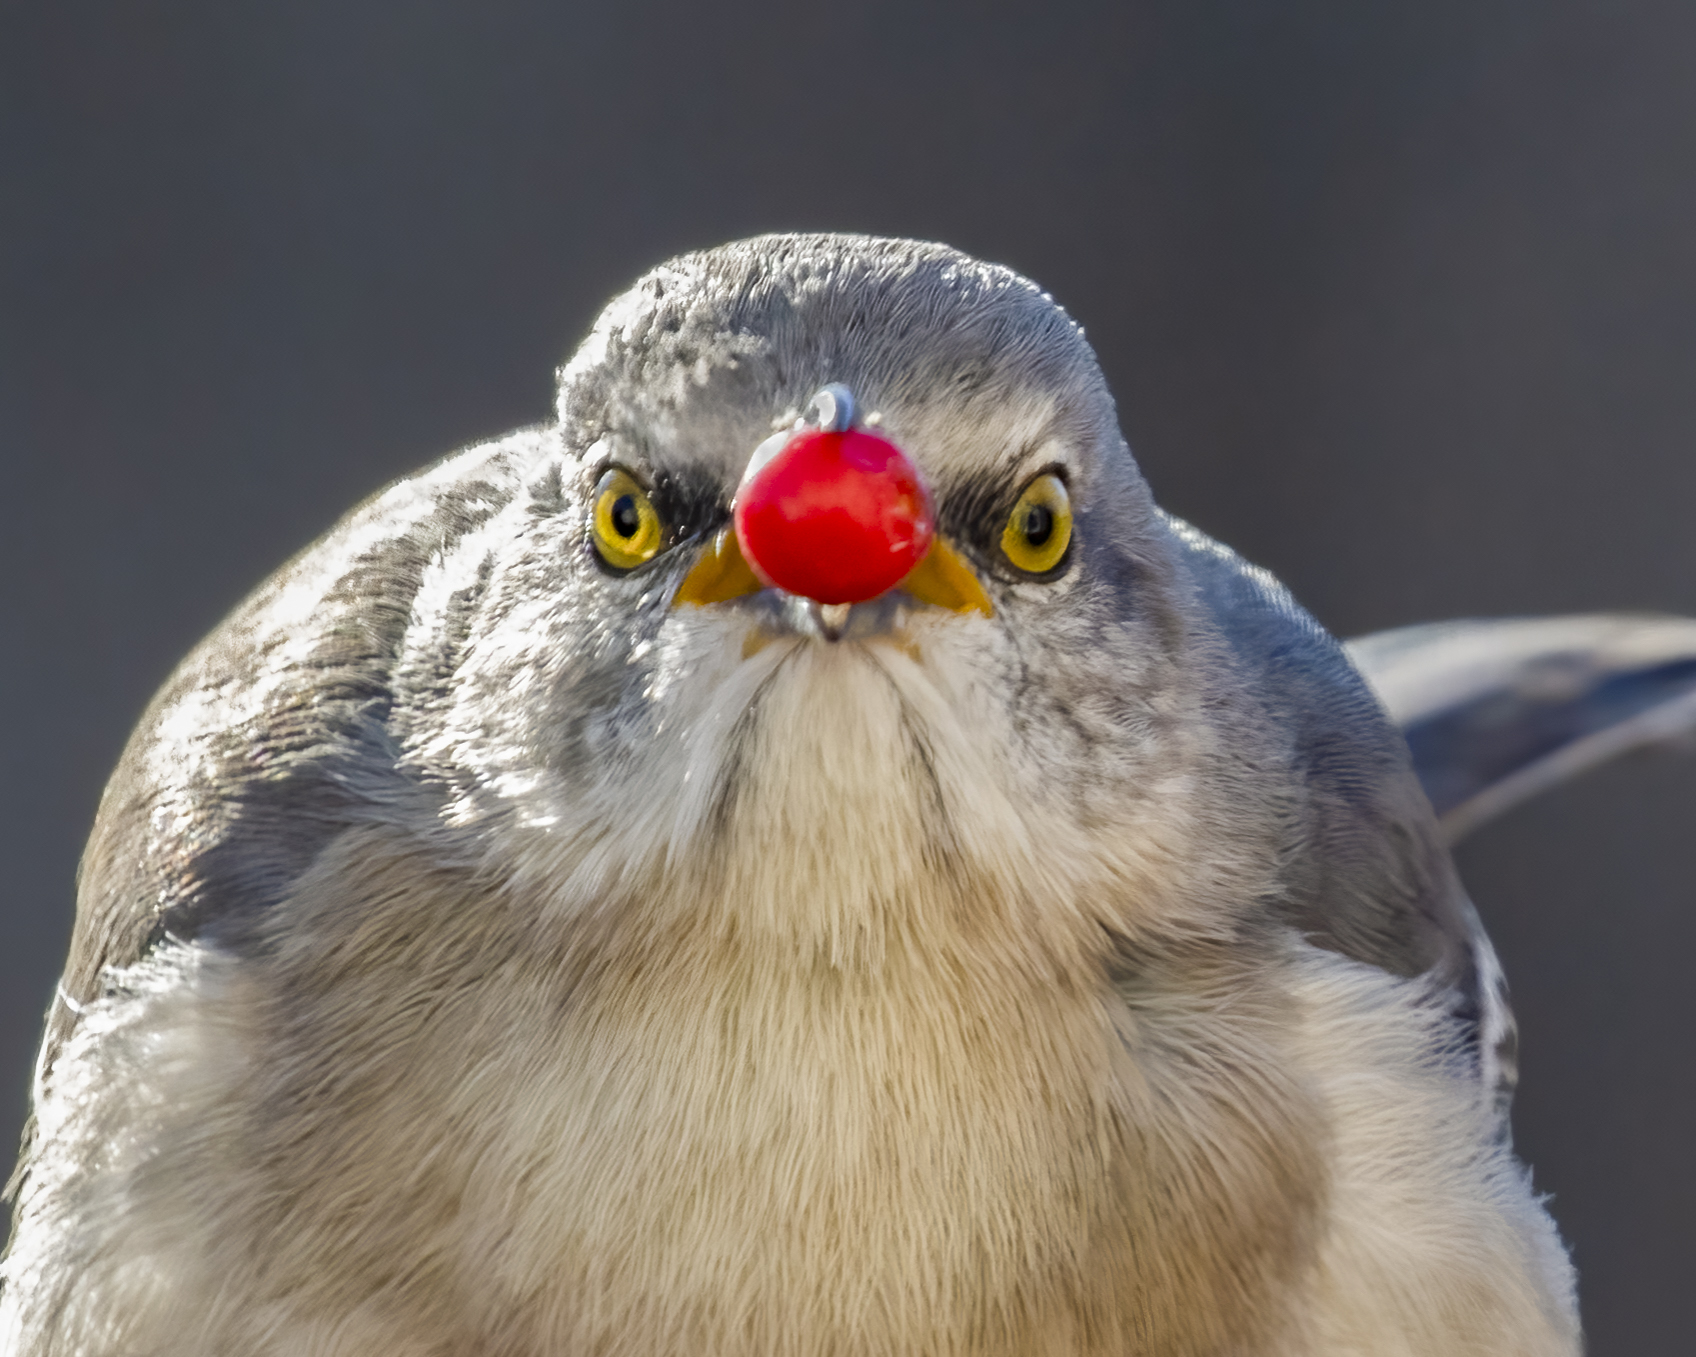 A mockingbird facing the camera with a bright red berry in its beak, so it appear to have a large red nose.